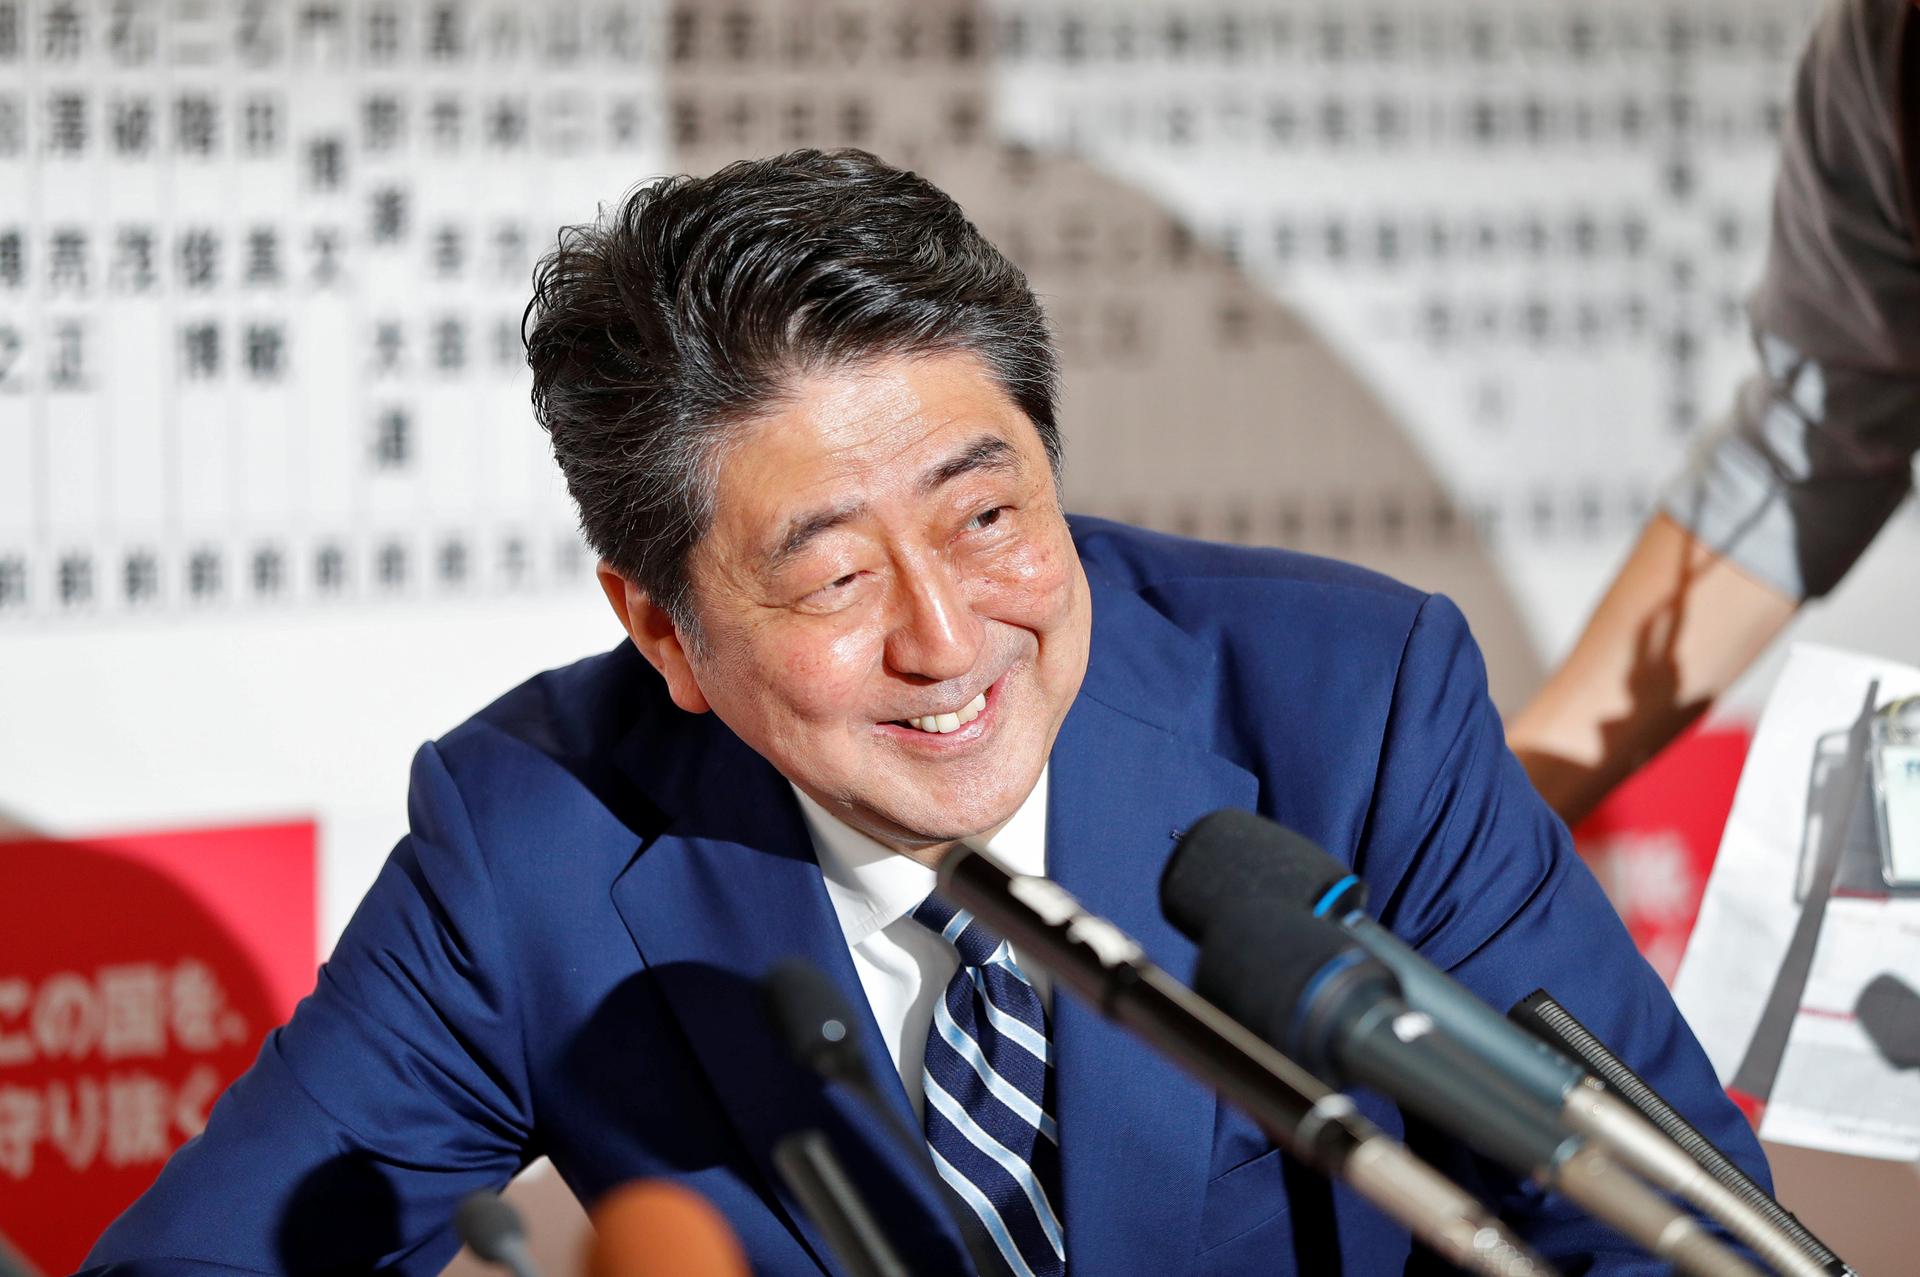 Japan's Prime Minister Shinzo Abe, leader of the Liberal Democratic Party, smiles during a news conference after Japan’s lower house election, at the LDP headquarters in Tokyo, Japan, Oct. 22, 2017.